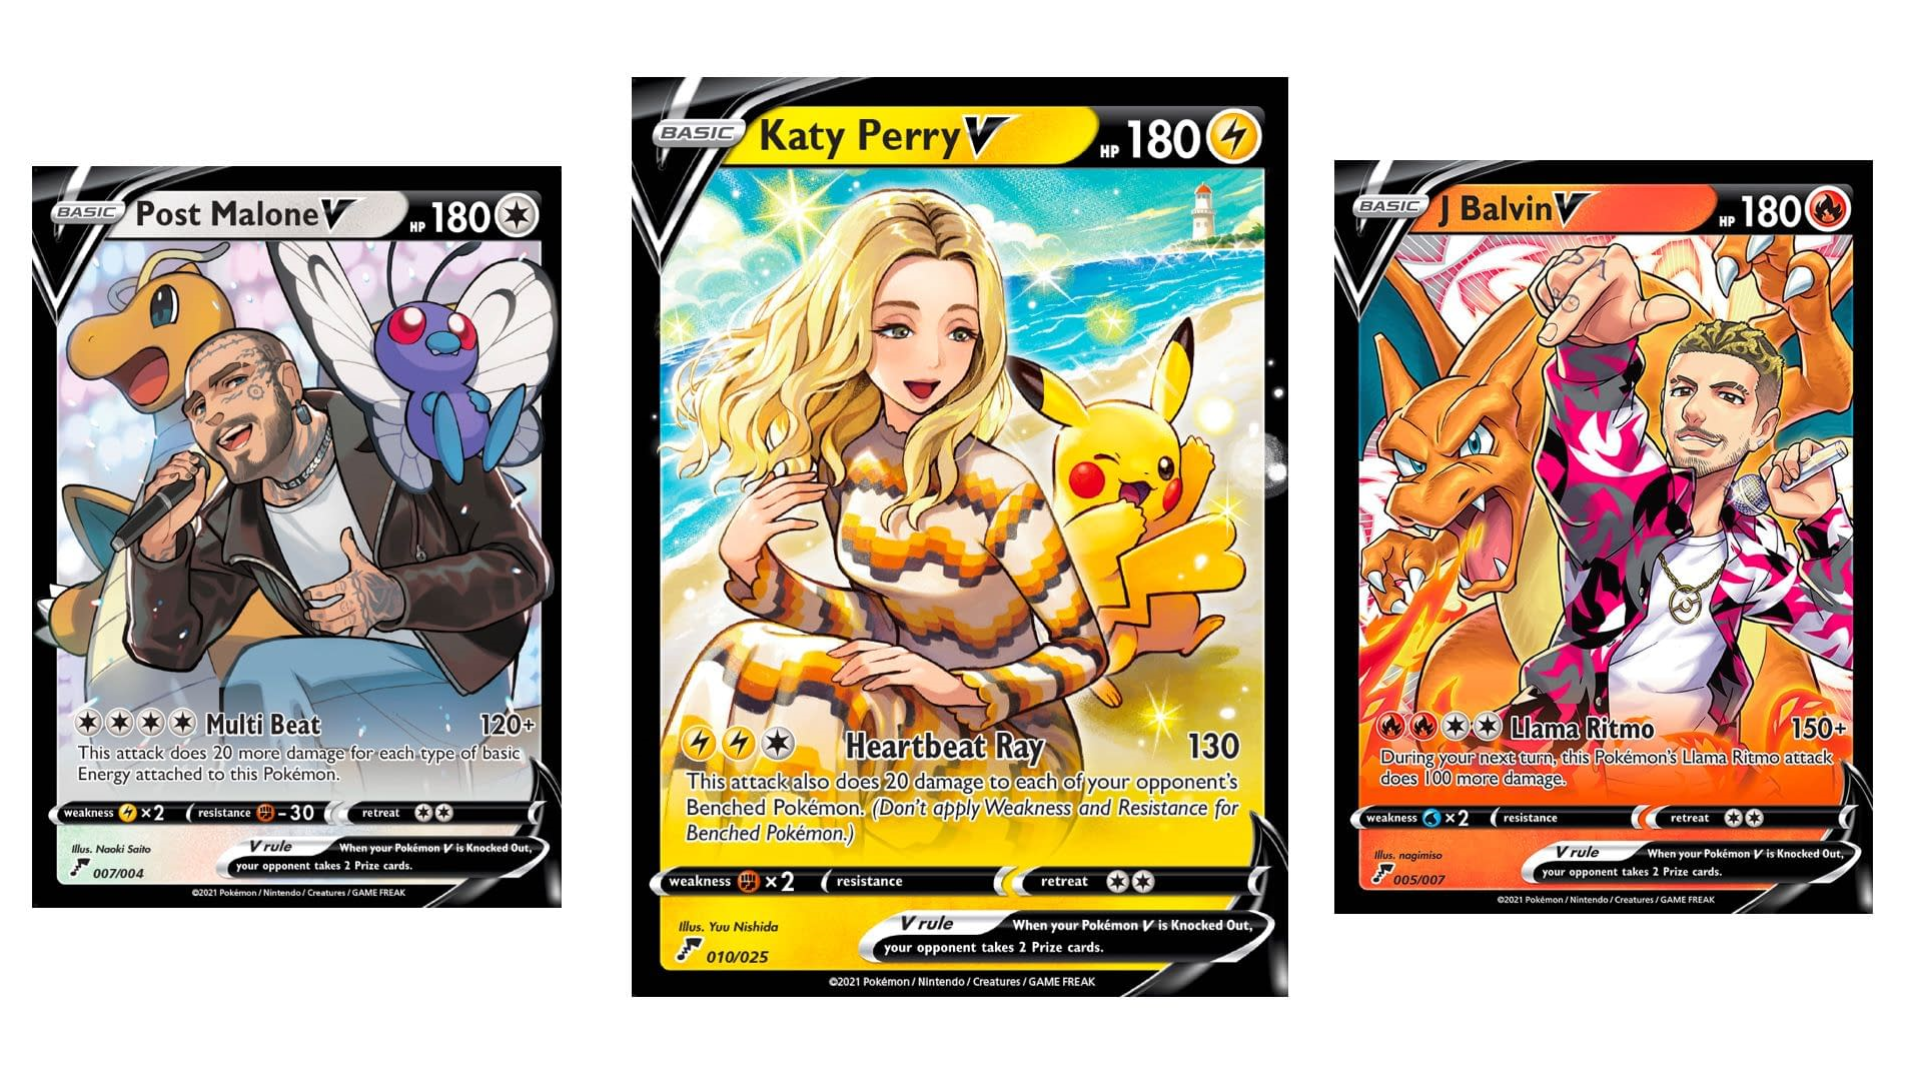 Image for Pokémon TCG says celebrity musician cards were never meant for players’ hands